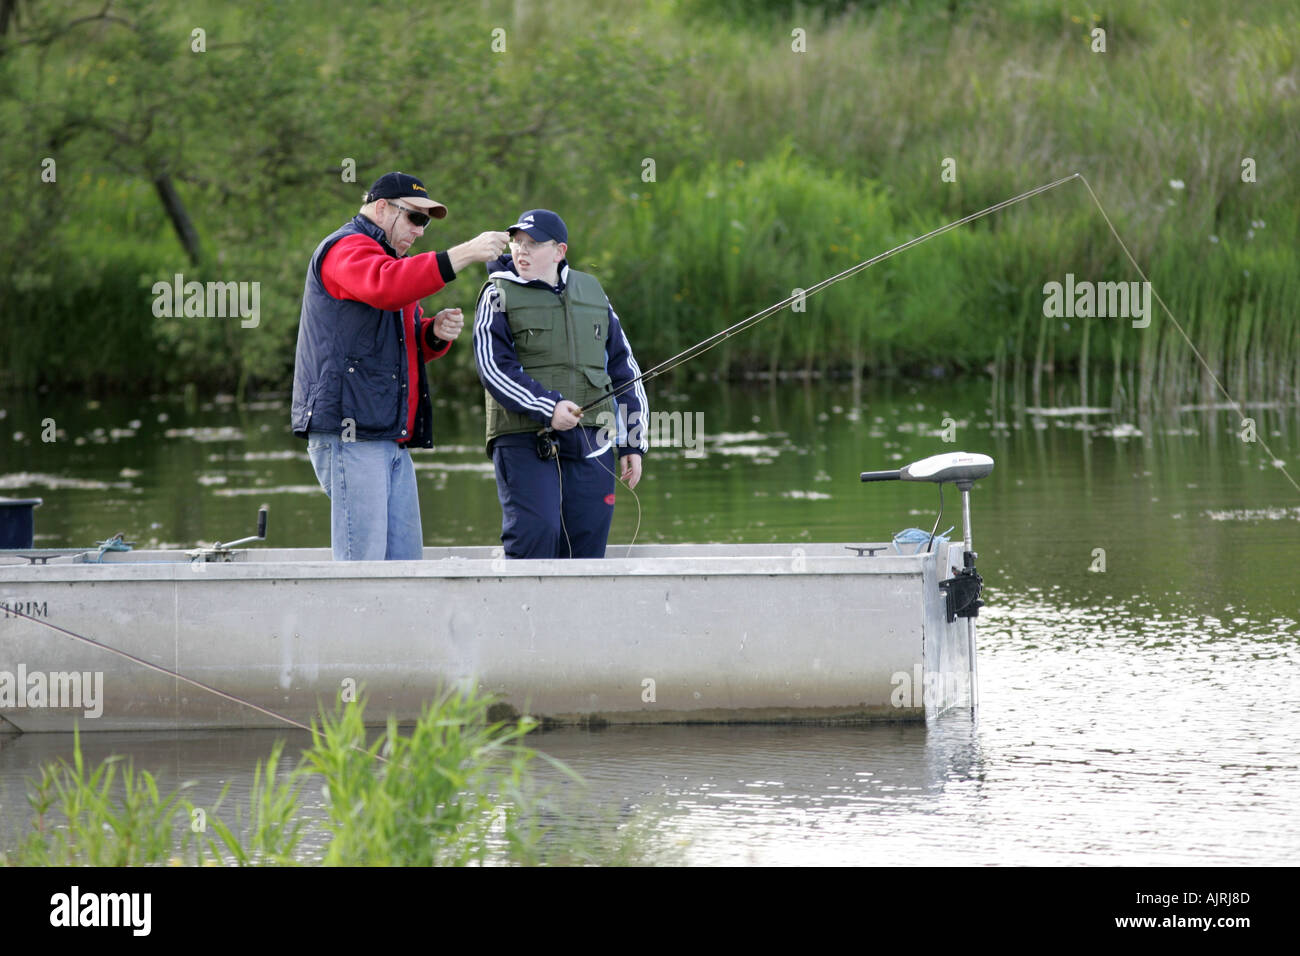 Instructor in boat teaching youth to fly fish Tildarg fishery county antrim northern ireland Stock Photo